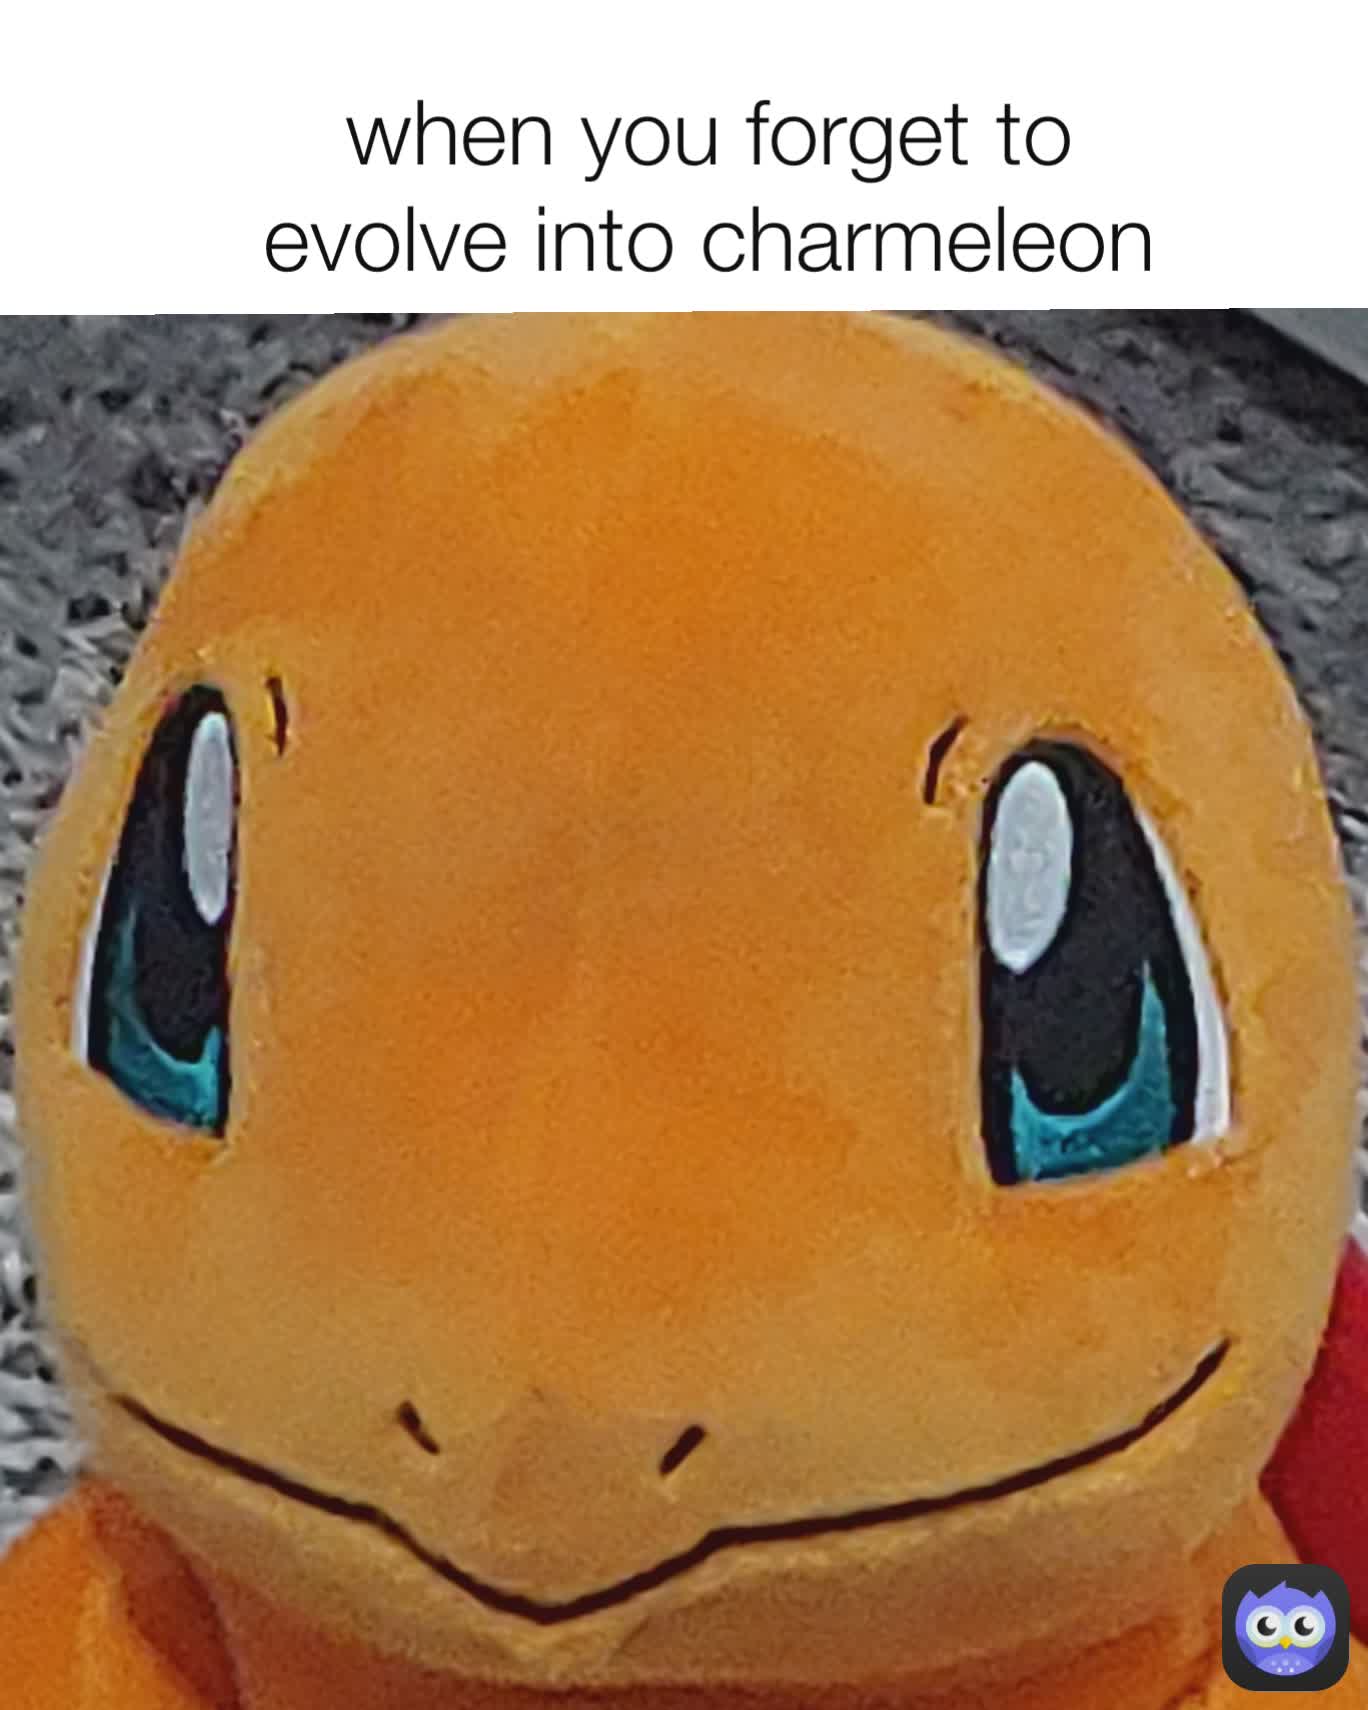 when you forget to evolve into charmeleon